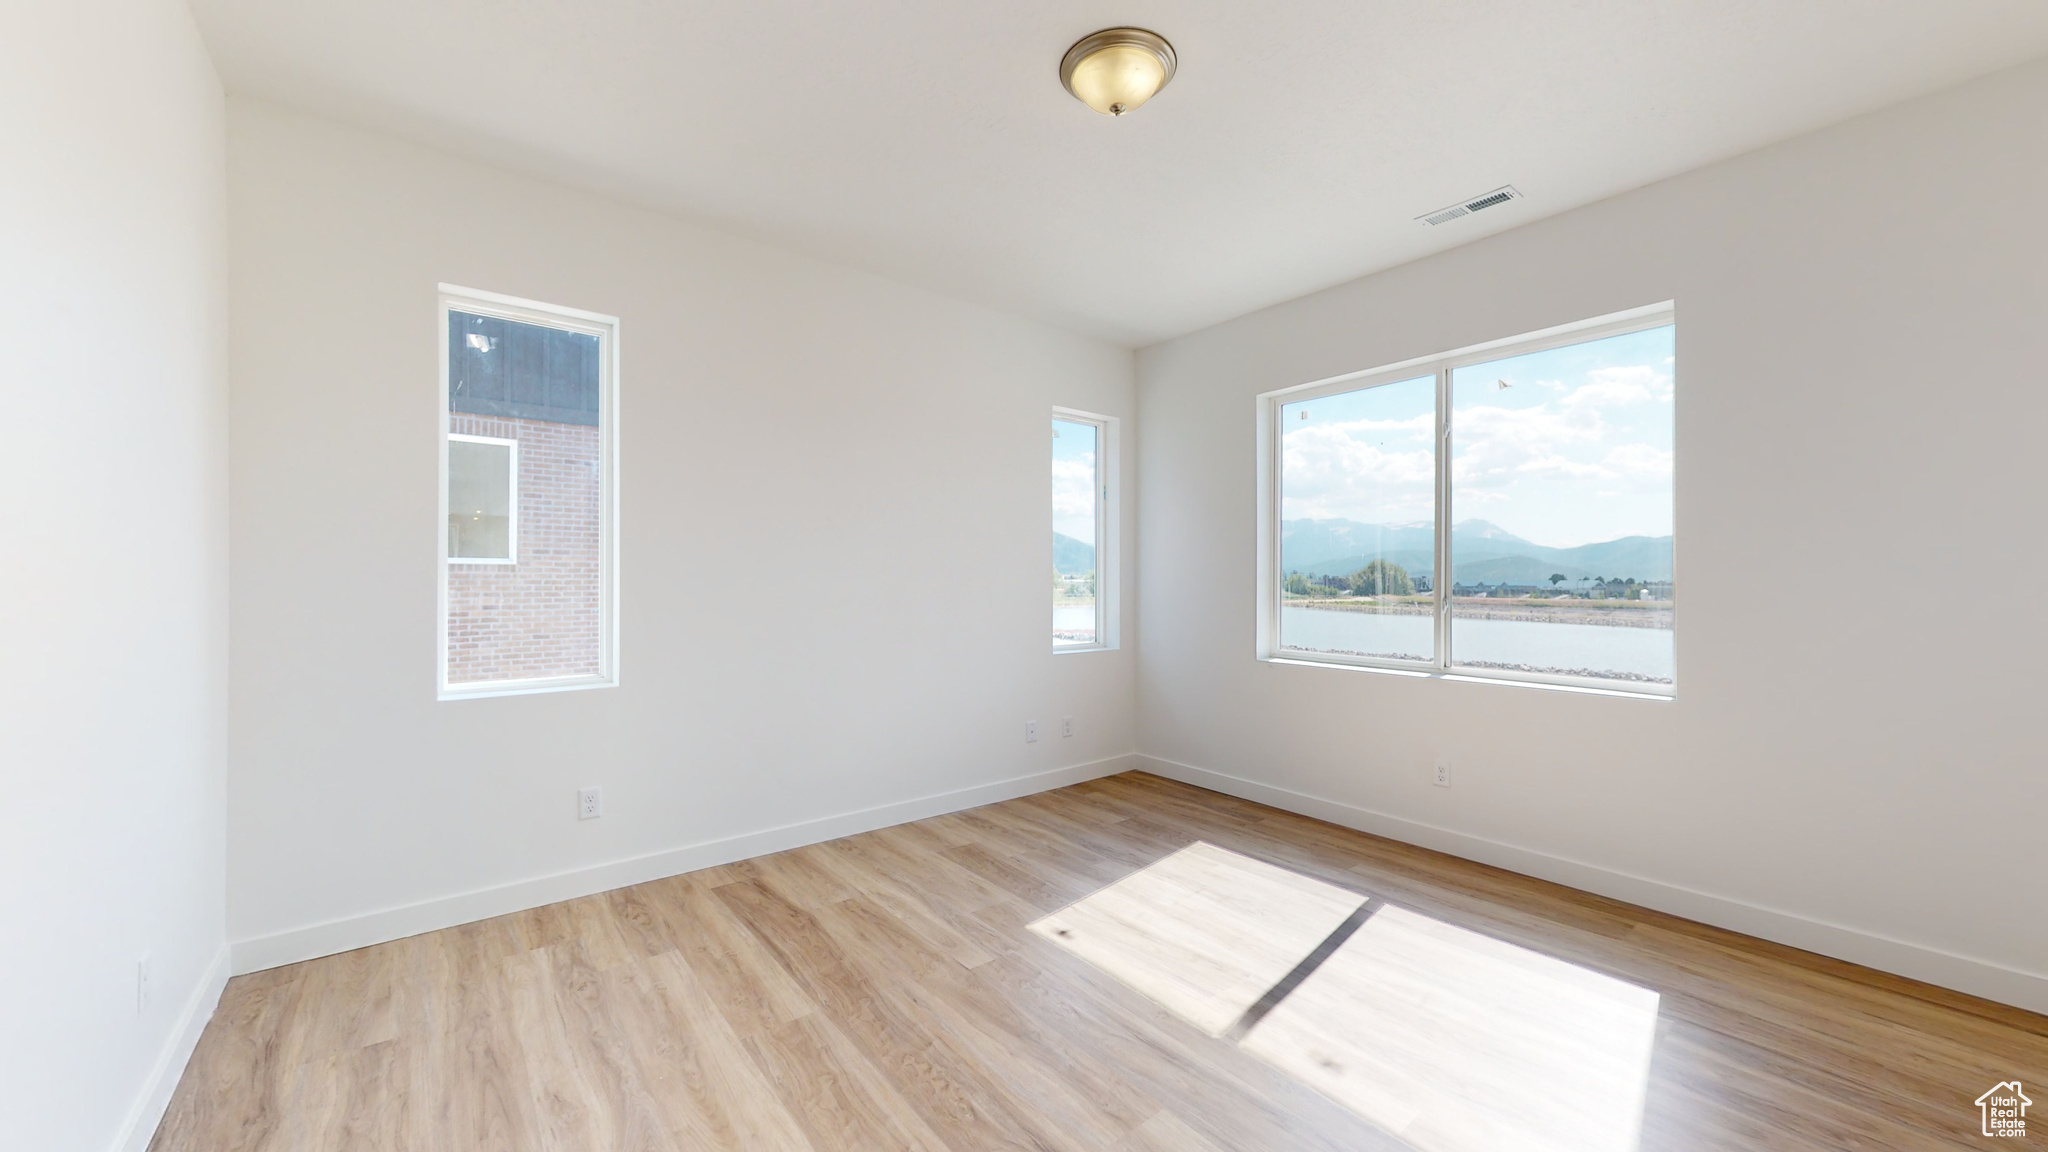 Unfurnished room with a water and mountain view and light hardwood / wood-style flooring